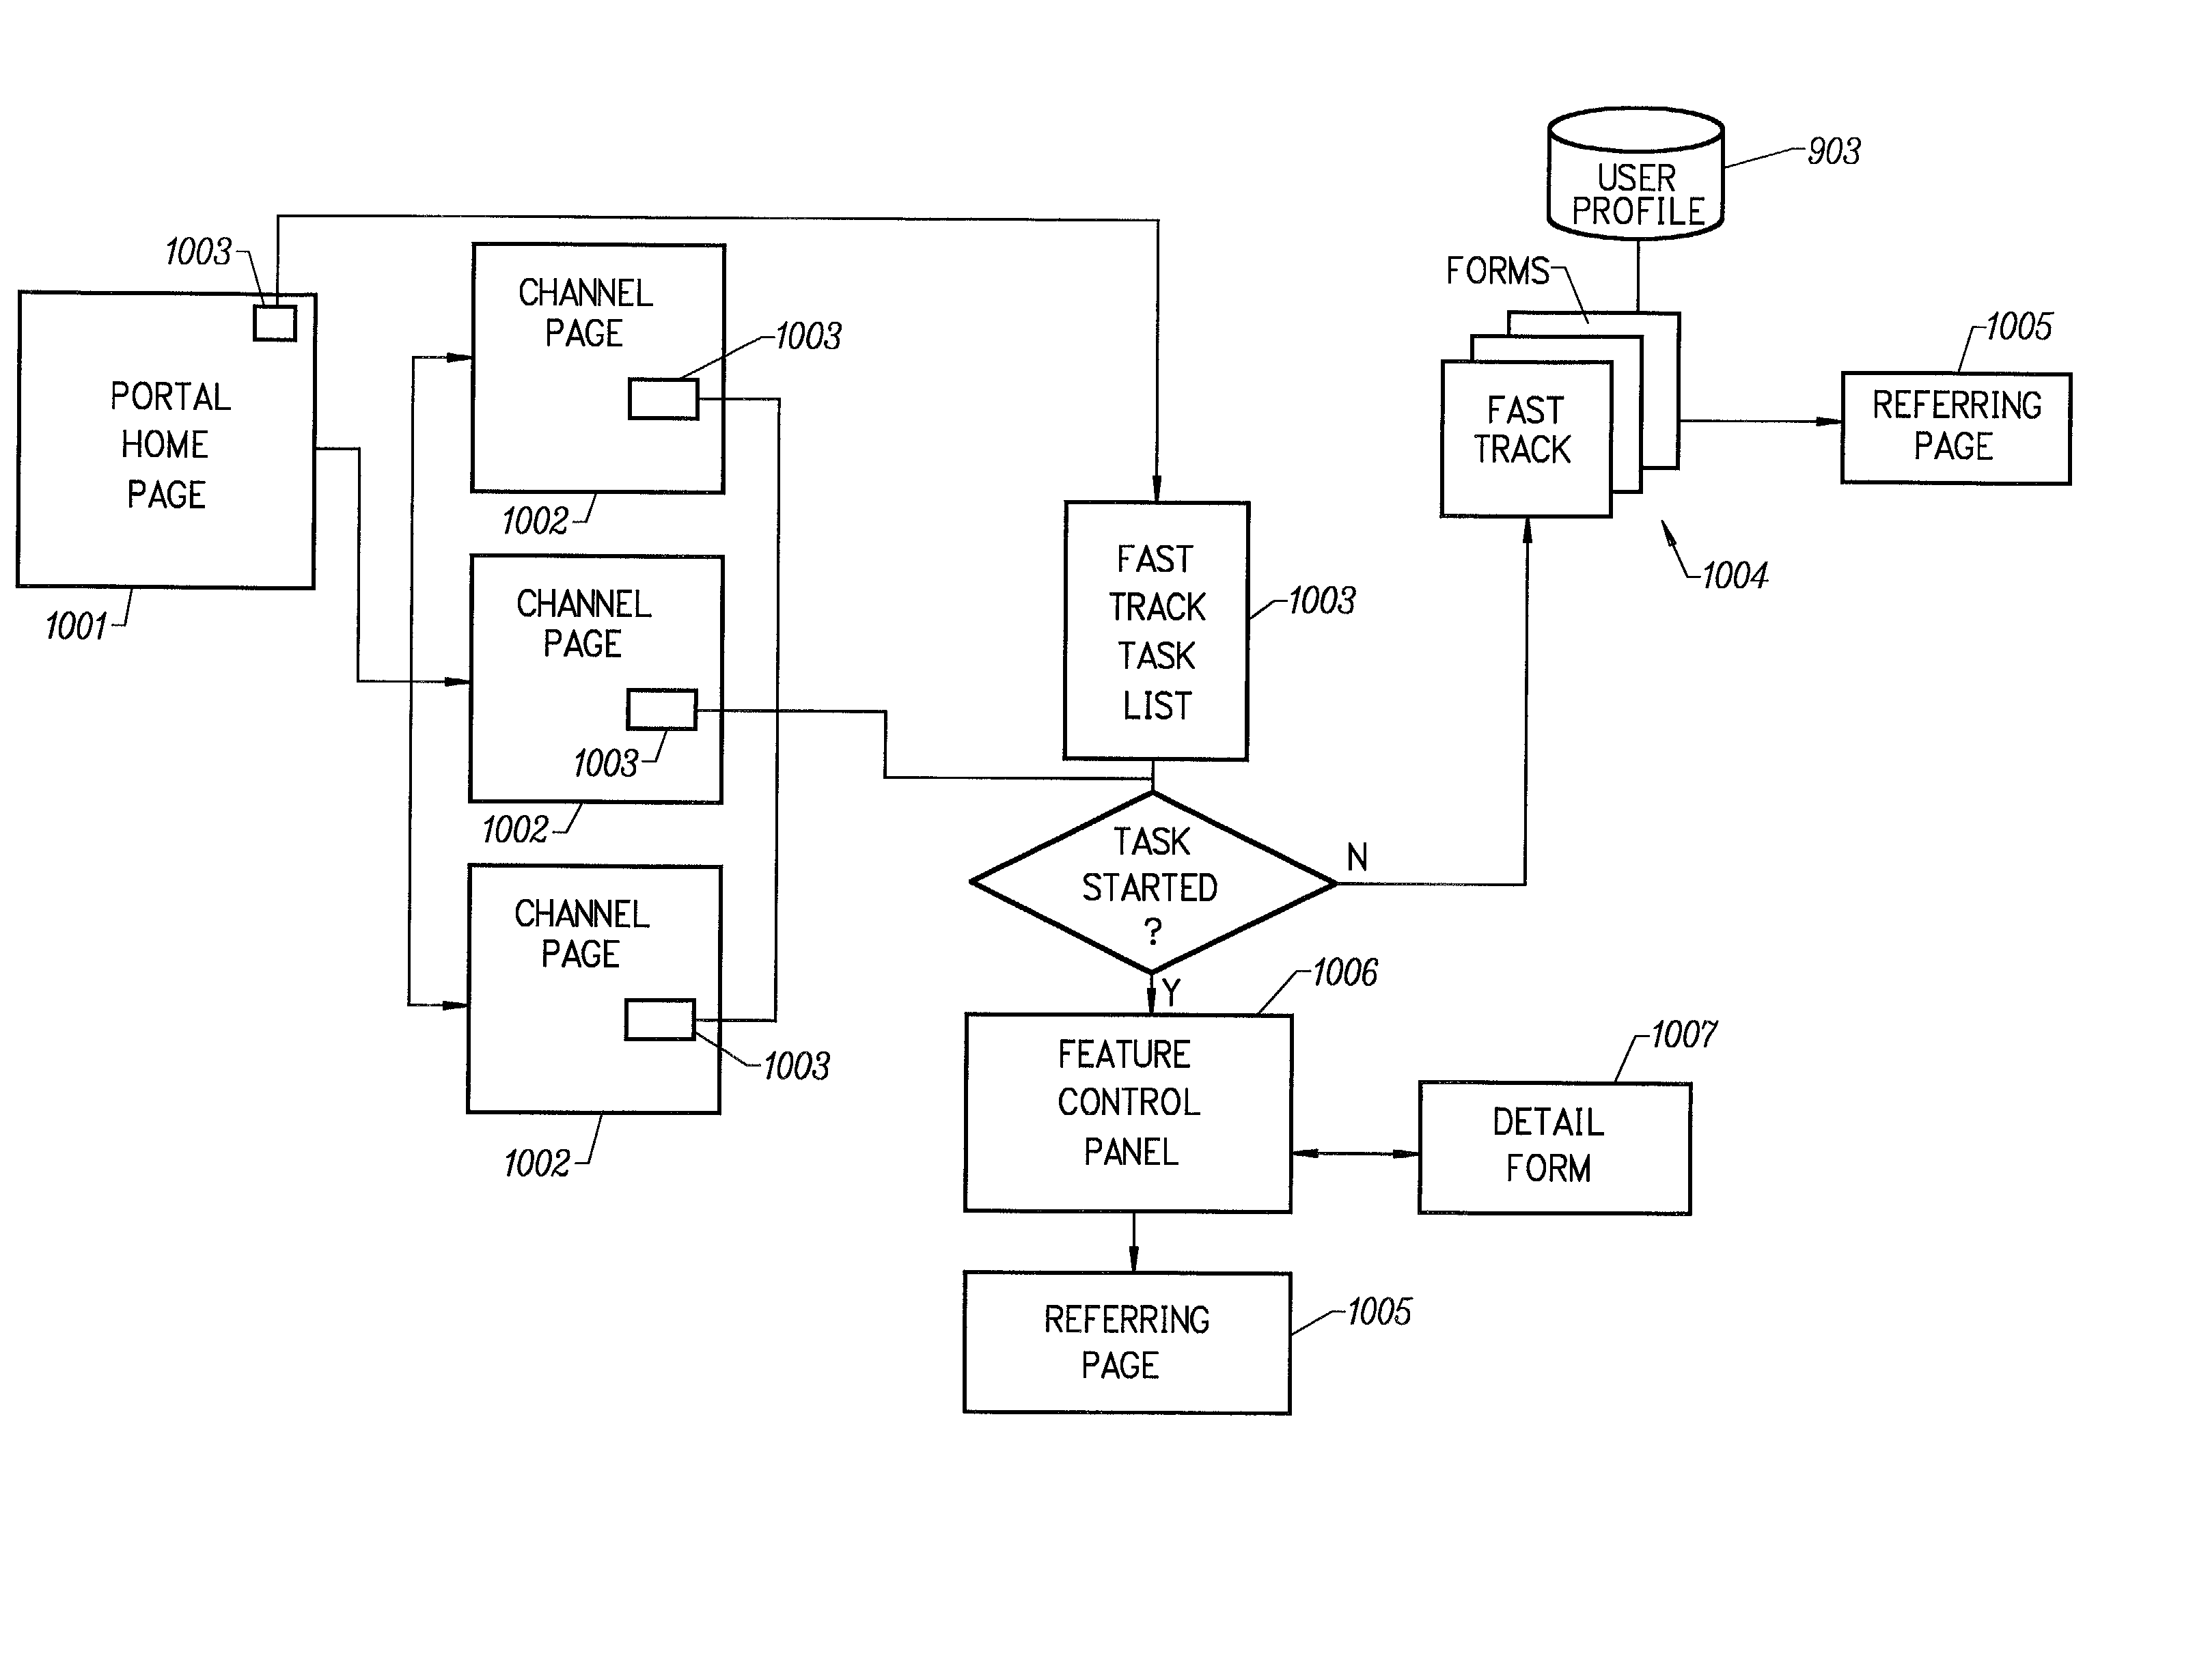 Method and apparatus for multi-vendor powered business portal with intelligent service promotion and user profile gathering